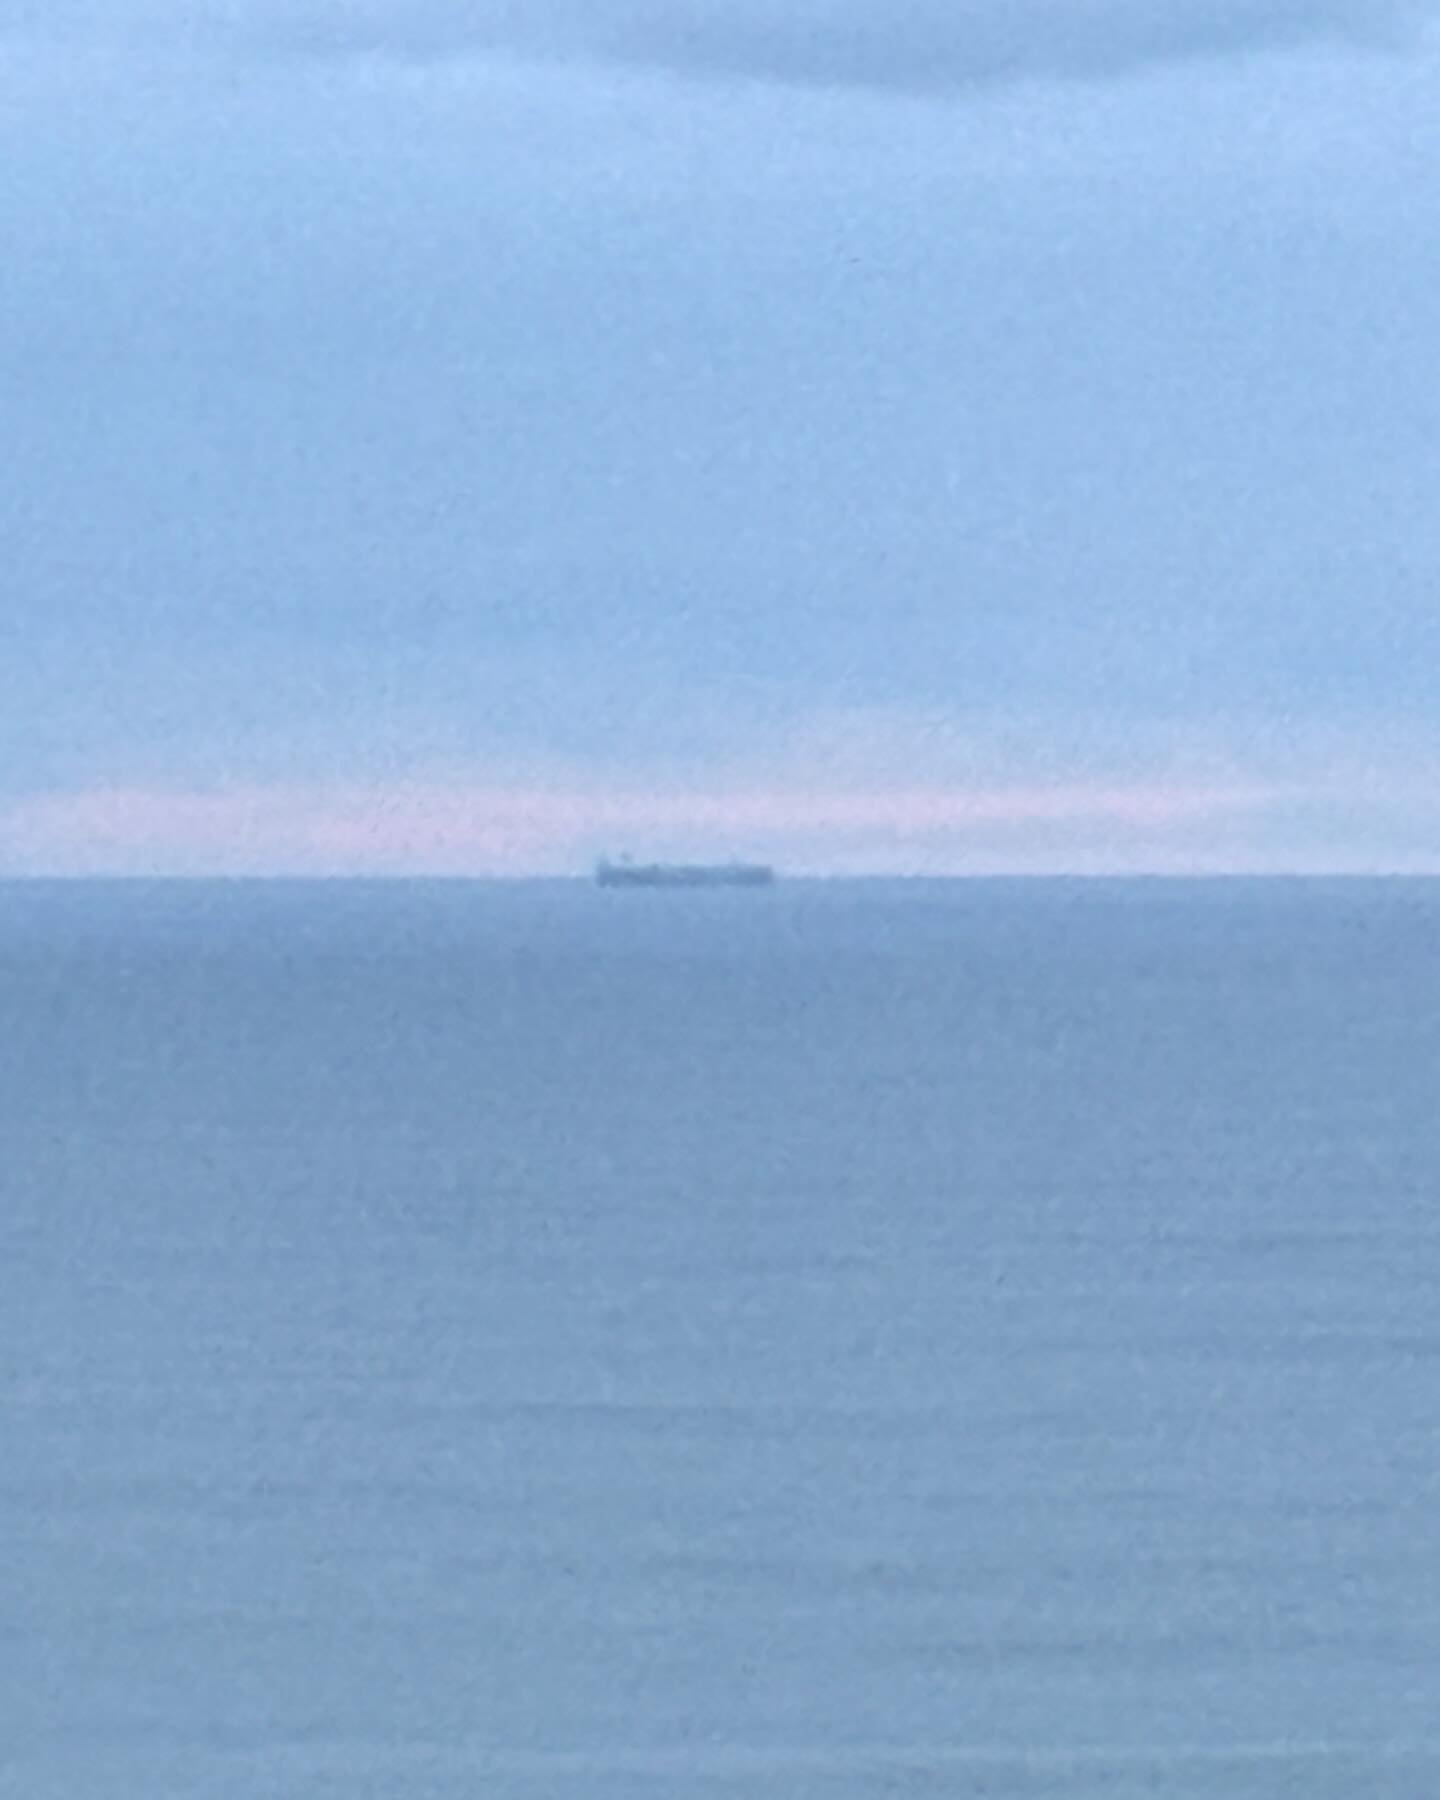 Freighter at dusk on the southern seas
.
.
#southernocean #bushwalking #gow